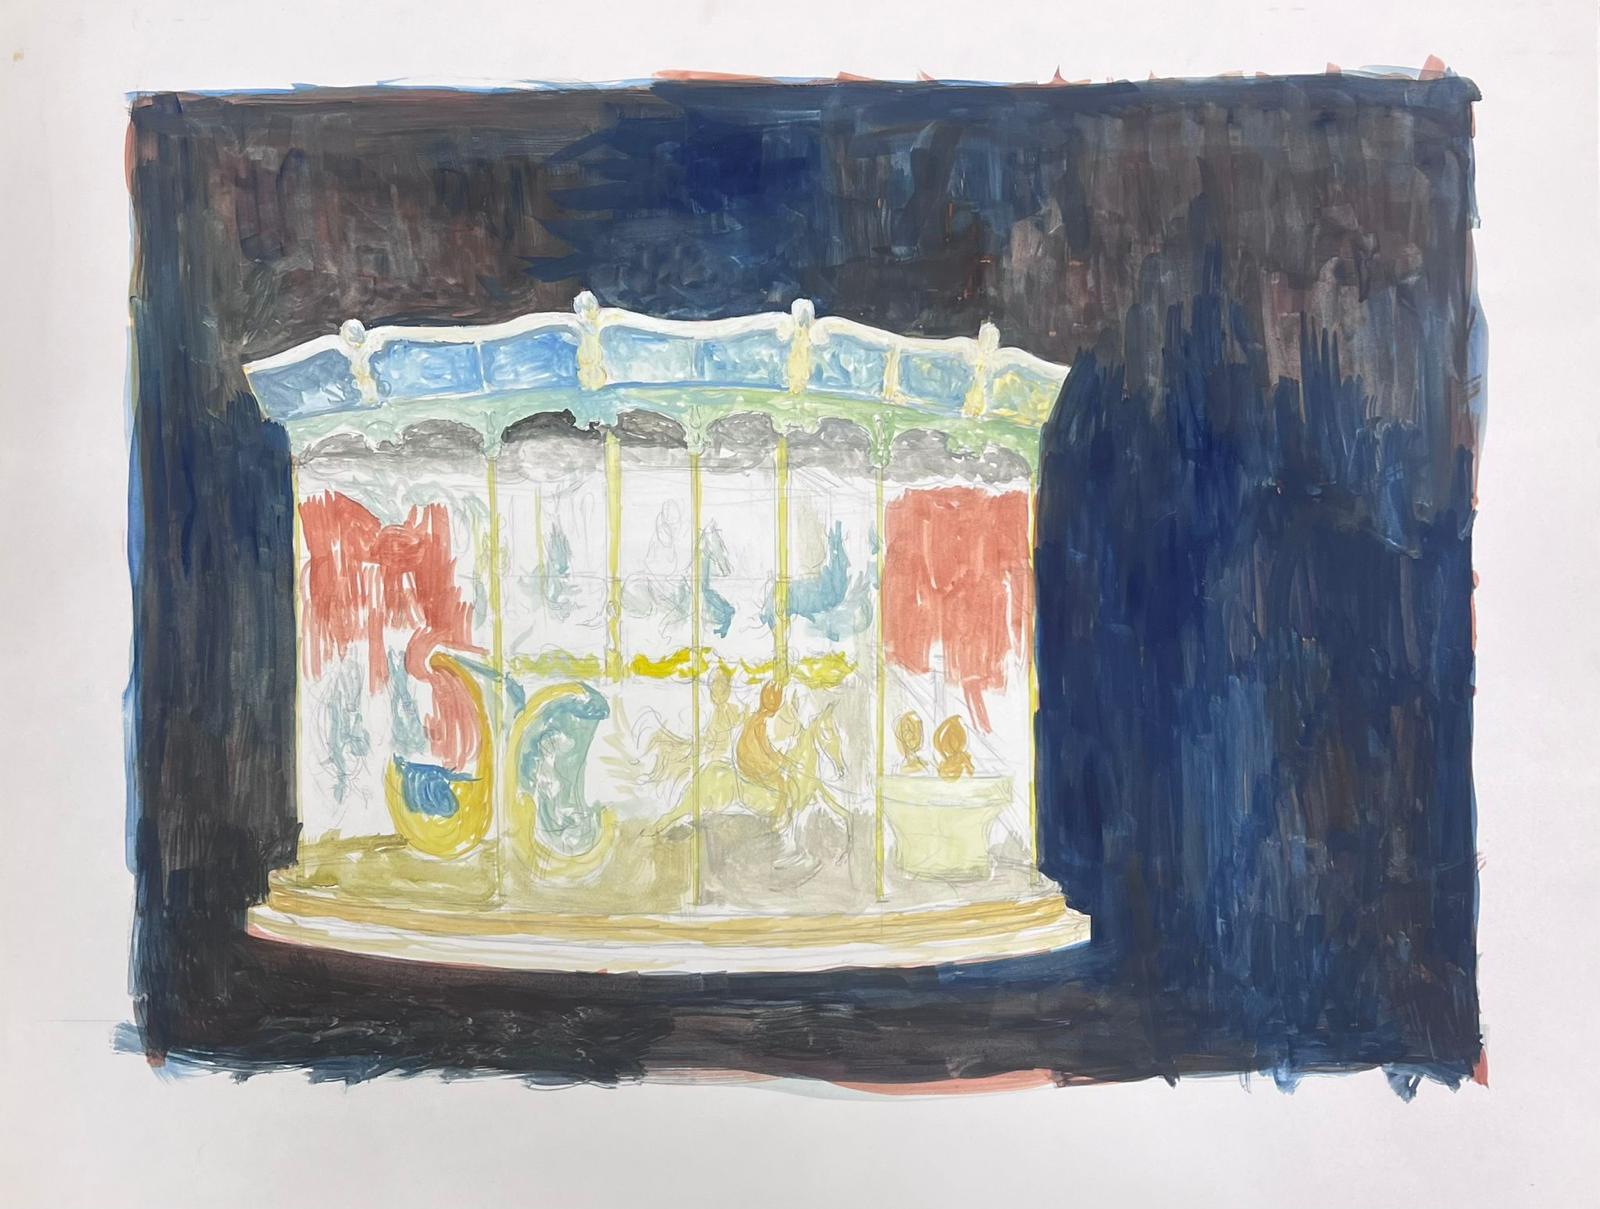 Merry Go Round Landscape
by Bernard Labbe (French mid 20th century)
original gouache on artist paper
size: 20 x 25.5 inches
condition: very good and ready to be enjoyed

provenance: the artists atelier/ studio, France (stamped verso)